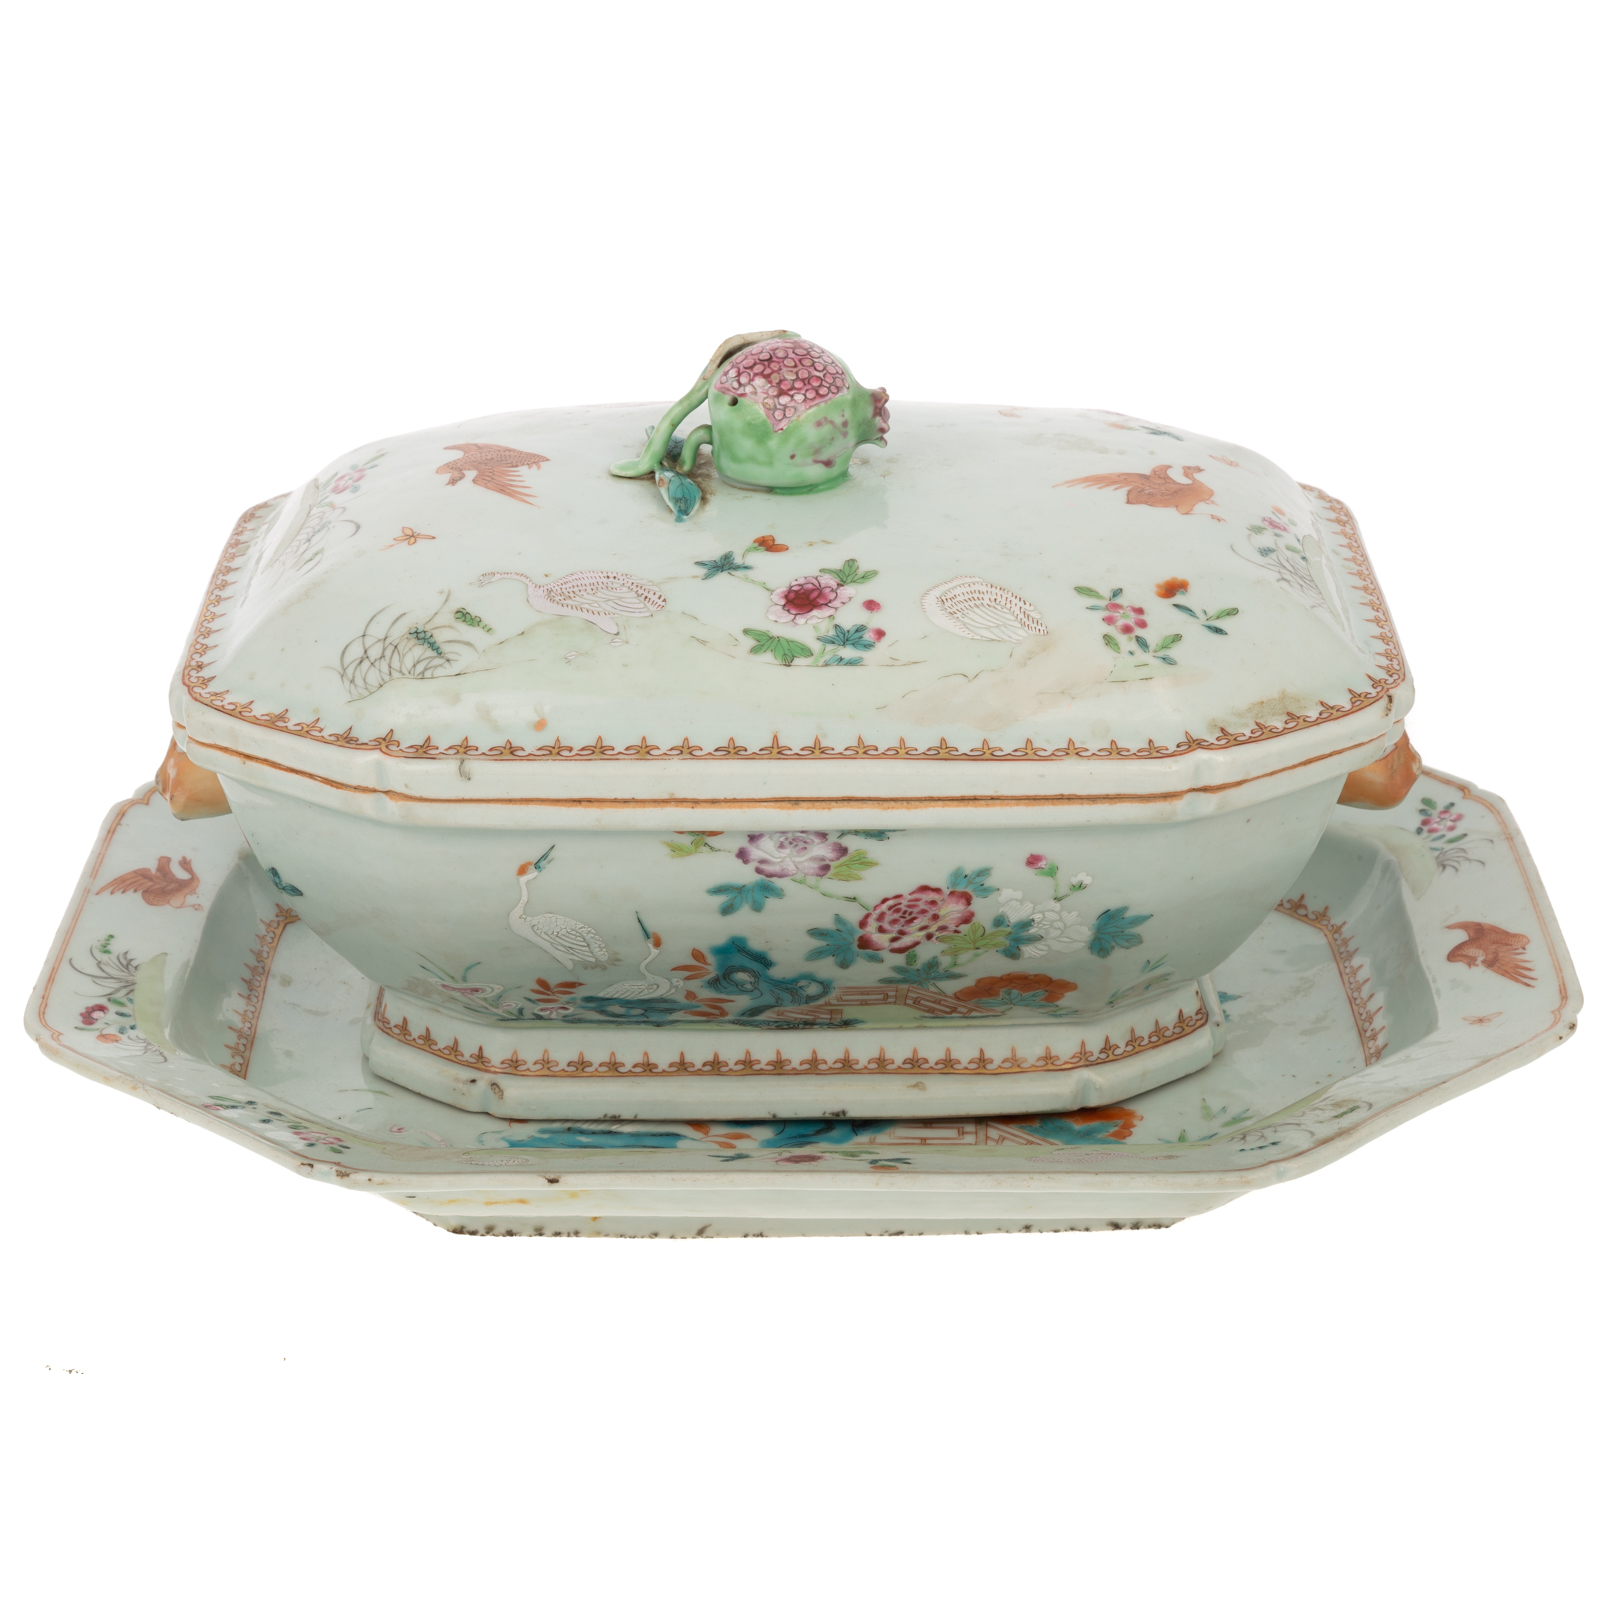 CHINESE EXPORT SOUP TUREEN STAND 36a001